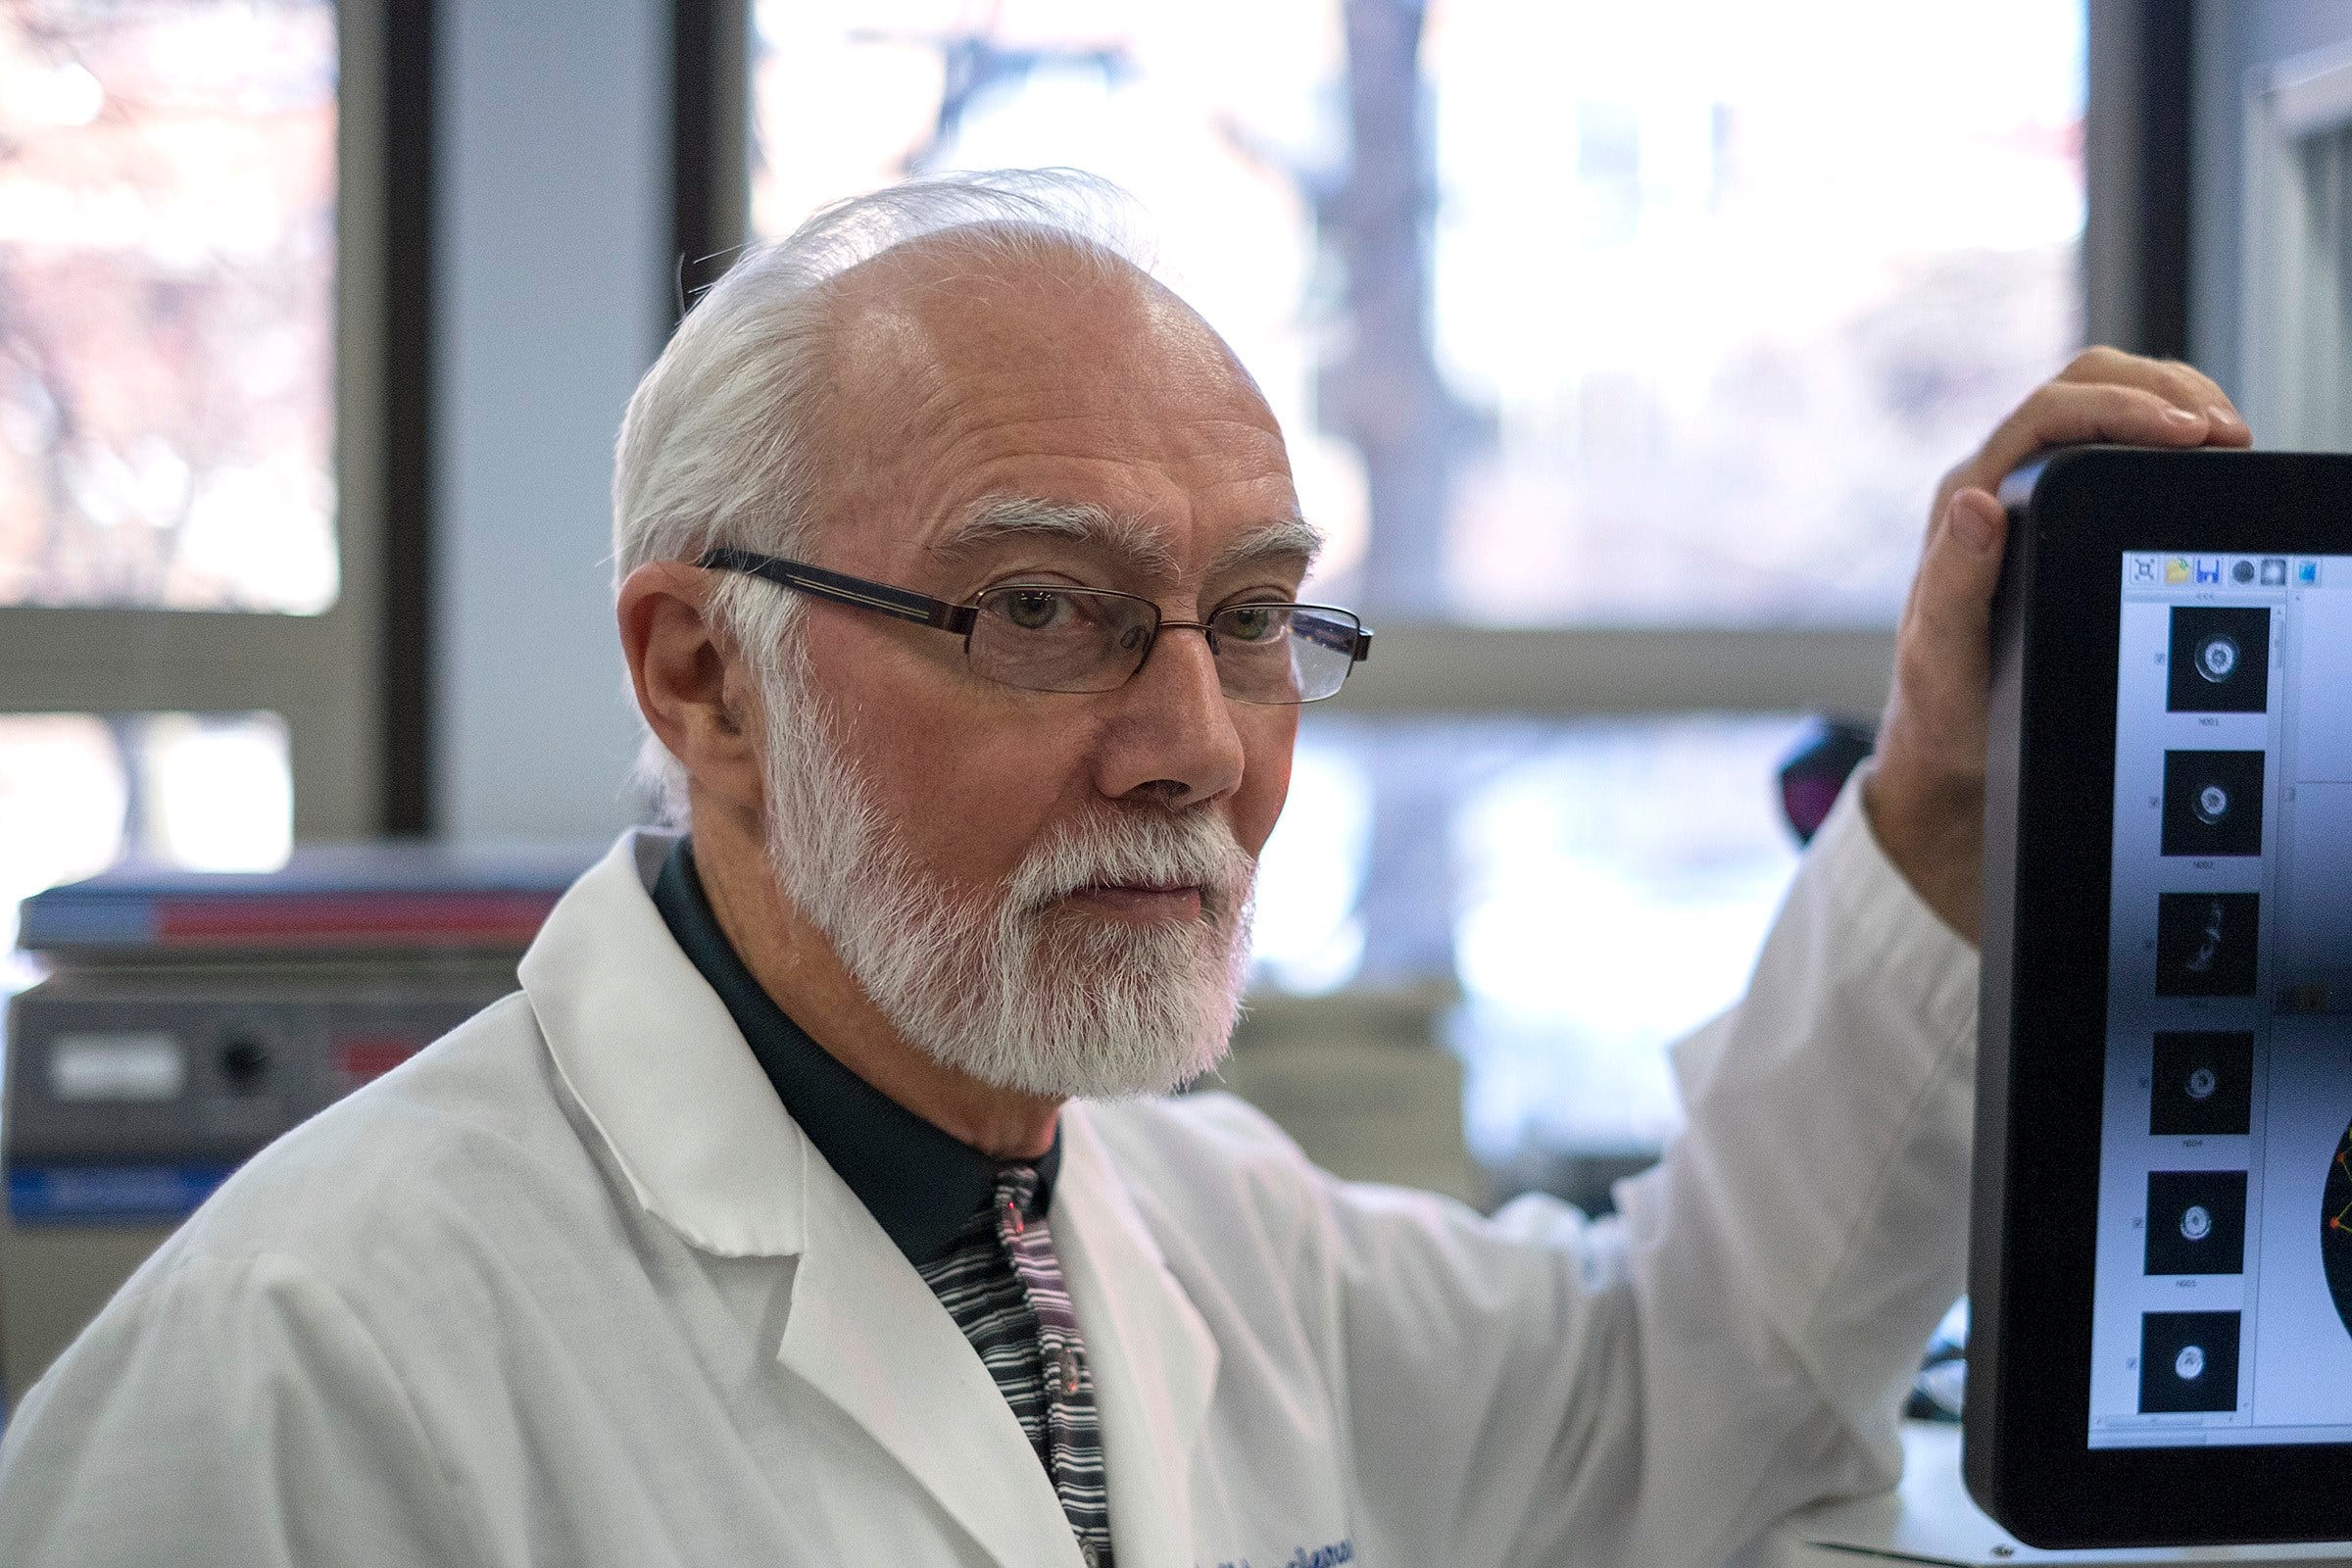 Blu-ray Cancer Detection Could Make Purdue Prof ‘Star of the Show’